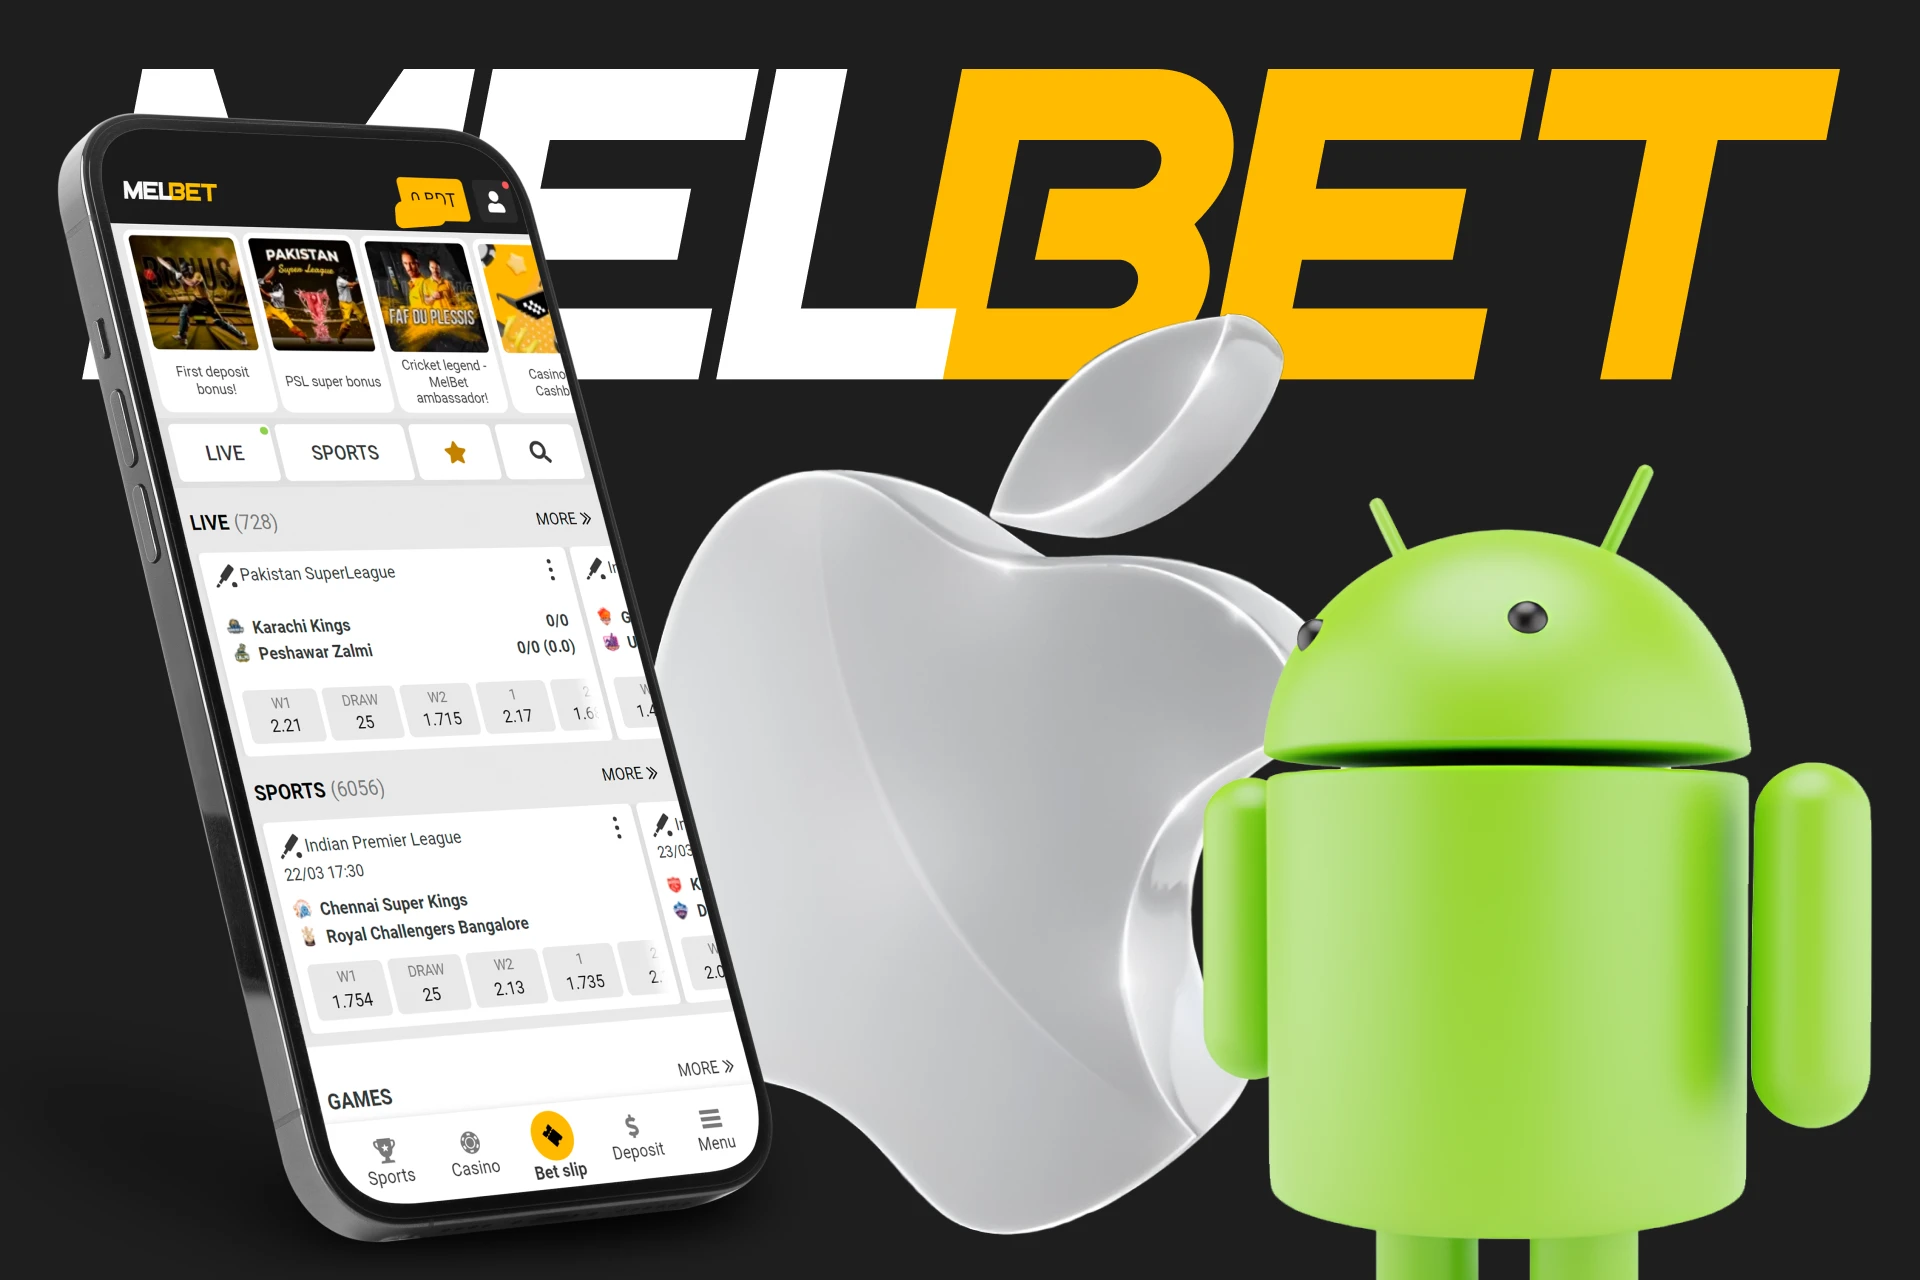 Melbet has an app for iOS and Android users.